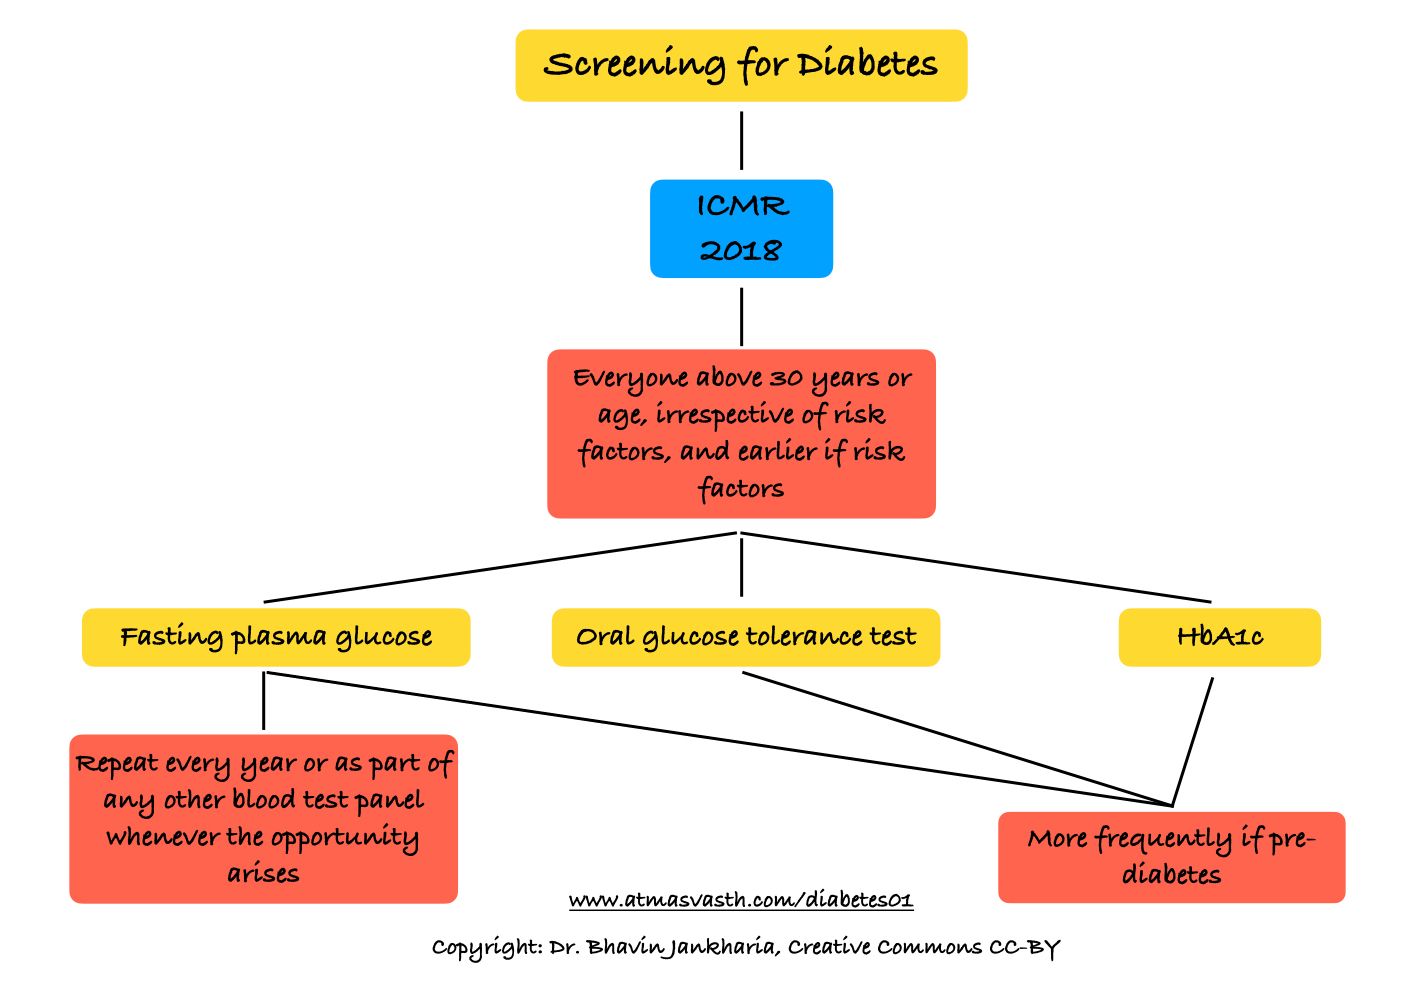 Screening for Diabetes - When, How and How Often